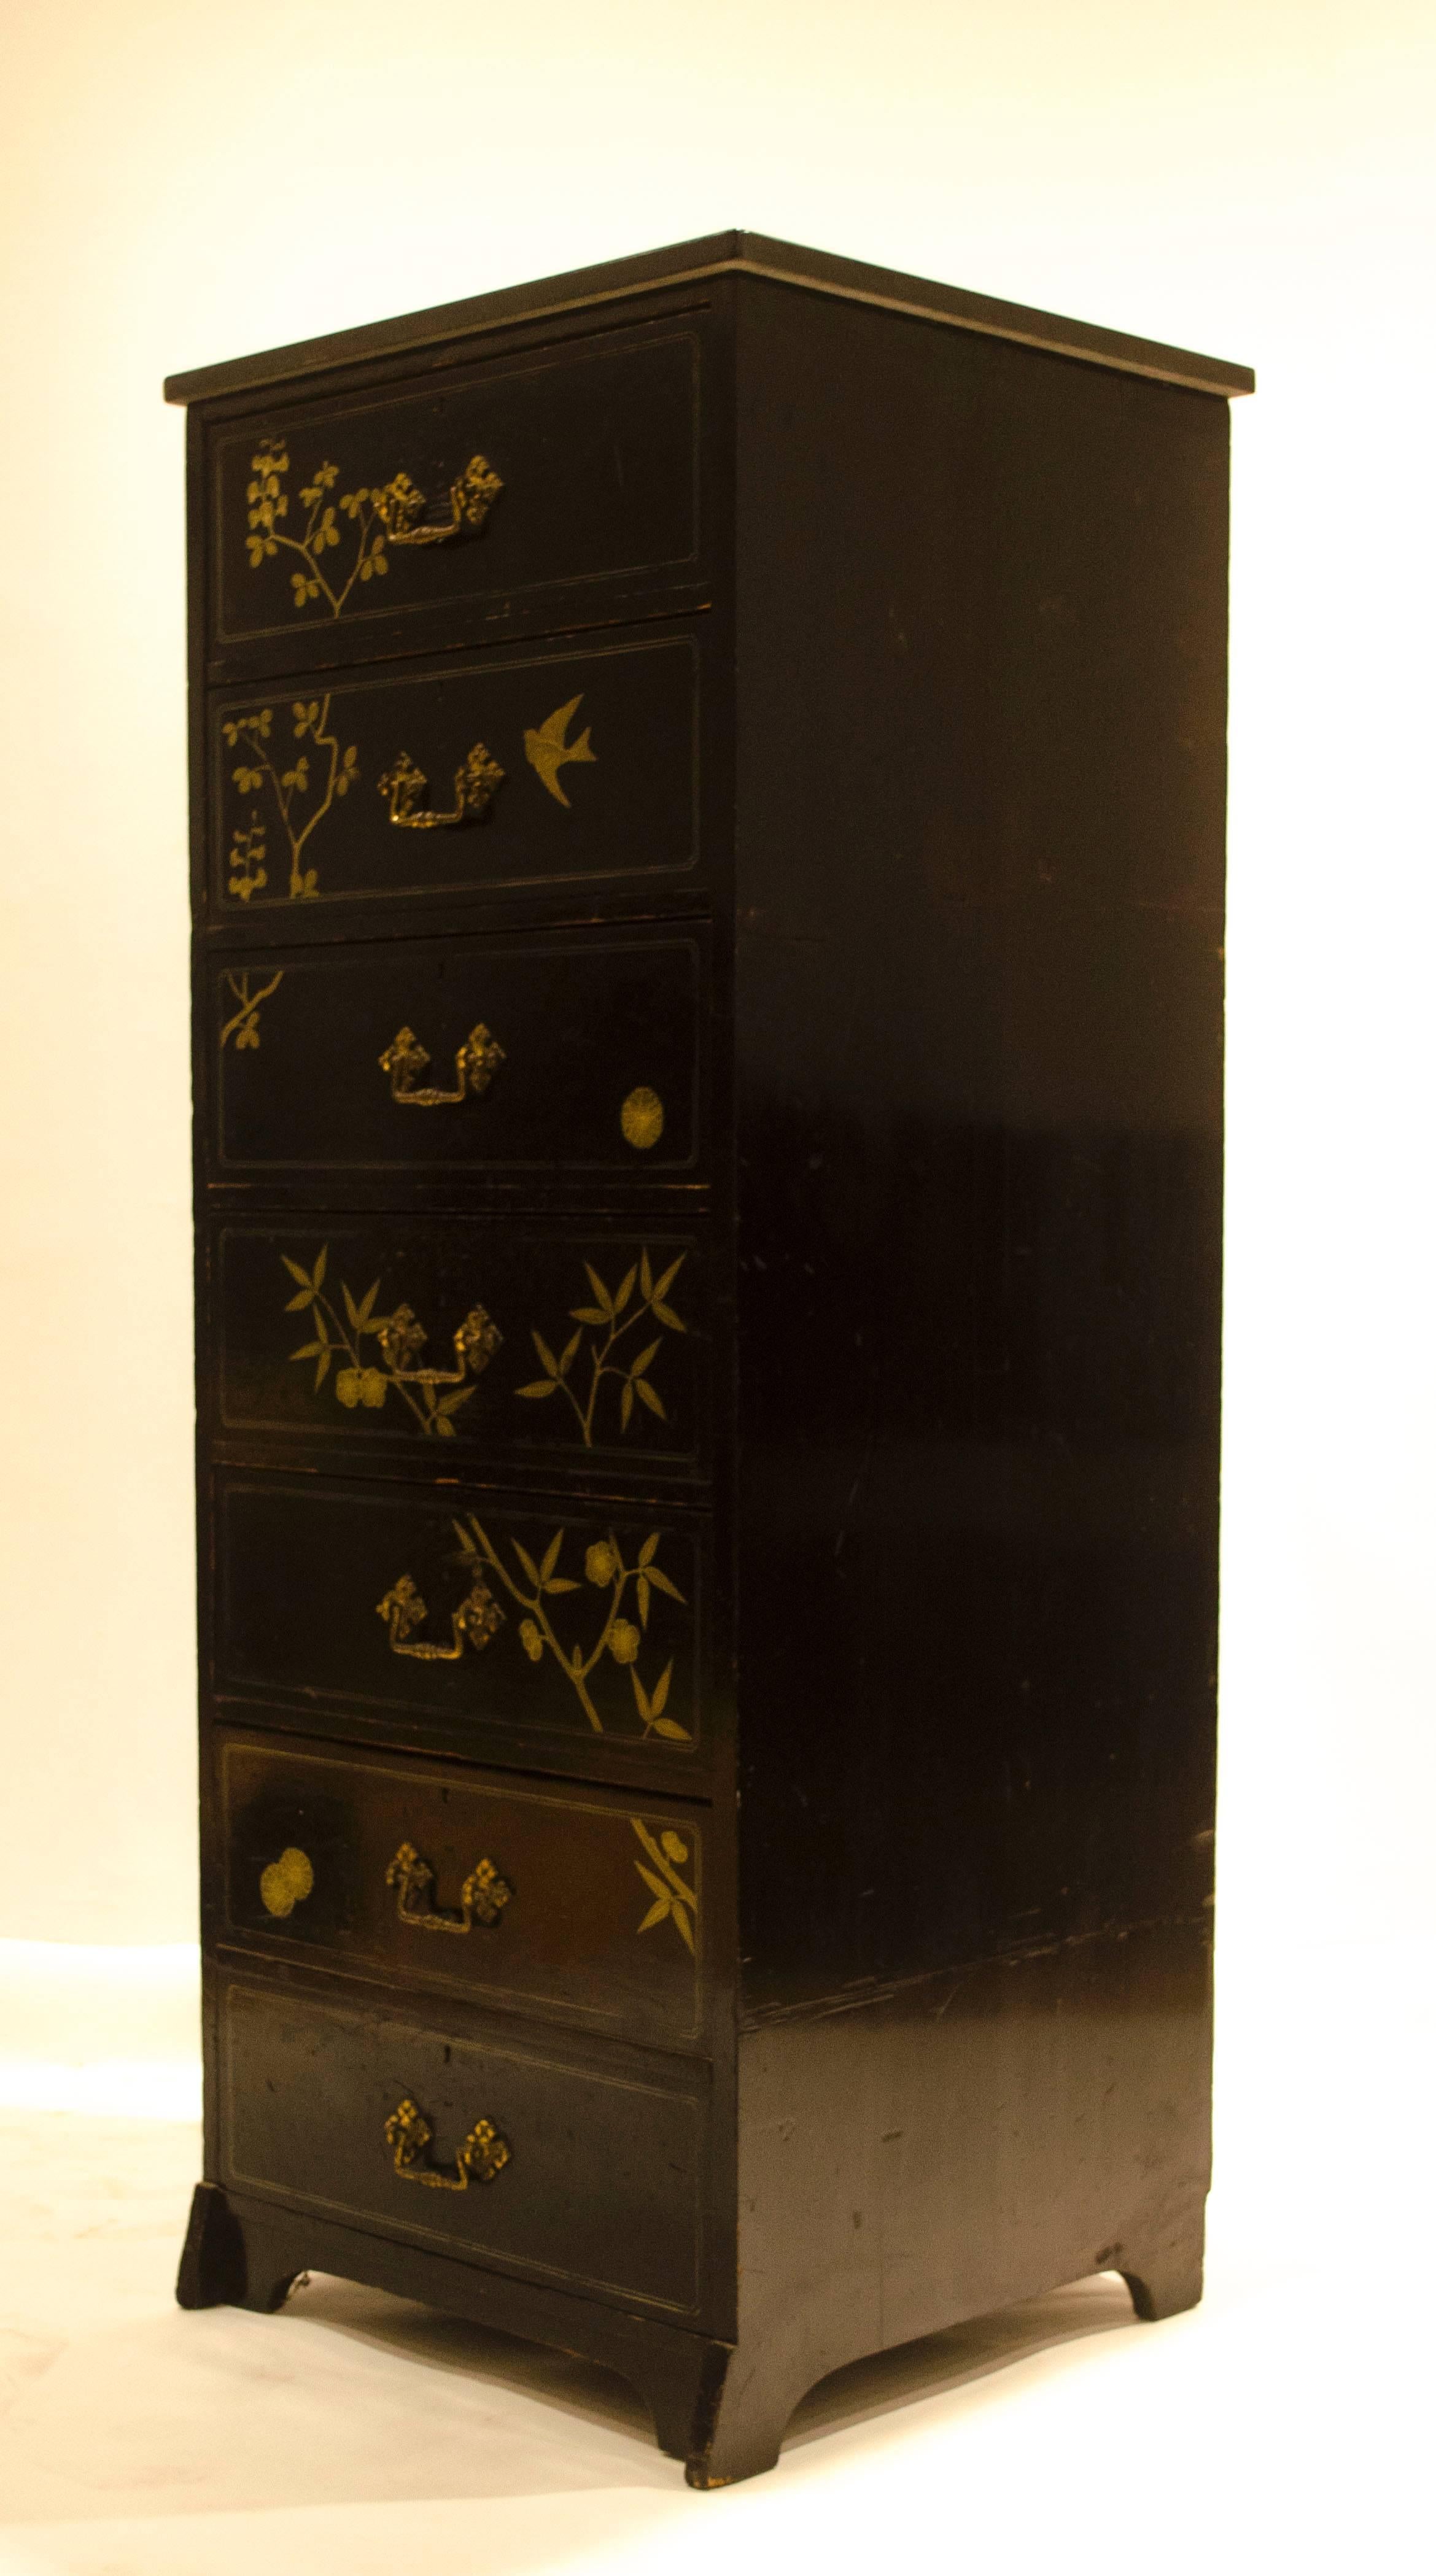 A rare and early Anglo-Japanese ebonized tall chest of drawers, designed by Daniel Cottier with gilt painted swallow, stylized bamboo and plant forms with rosettes with a later black marble-top, the lower drawer a double. 

The last three images